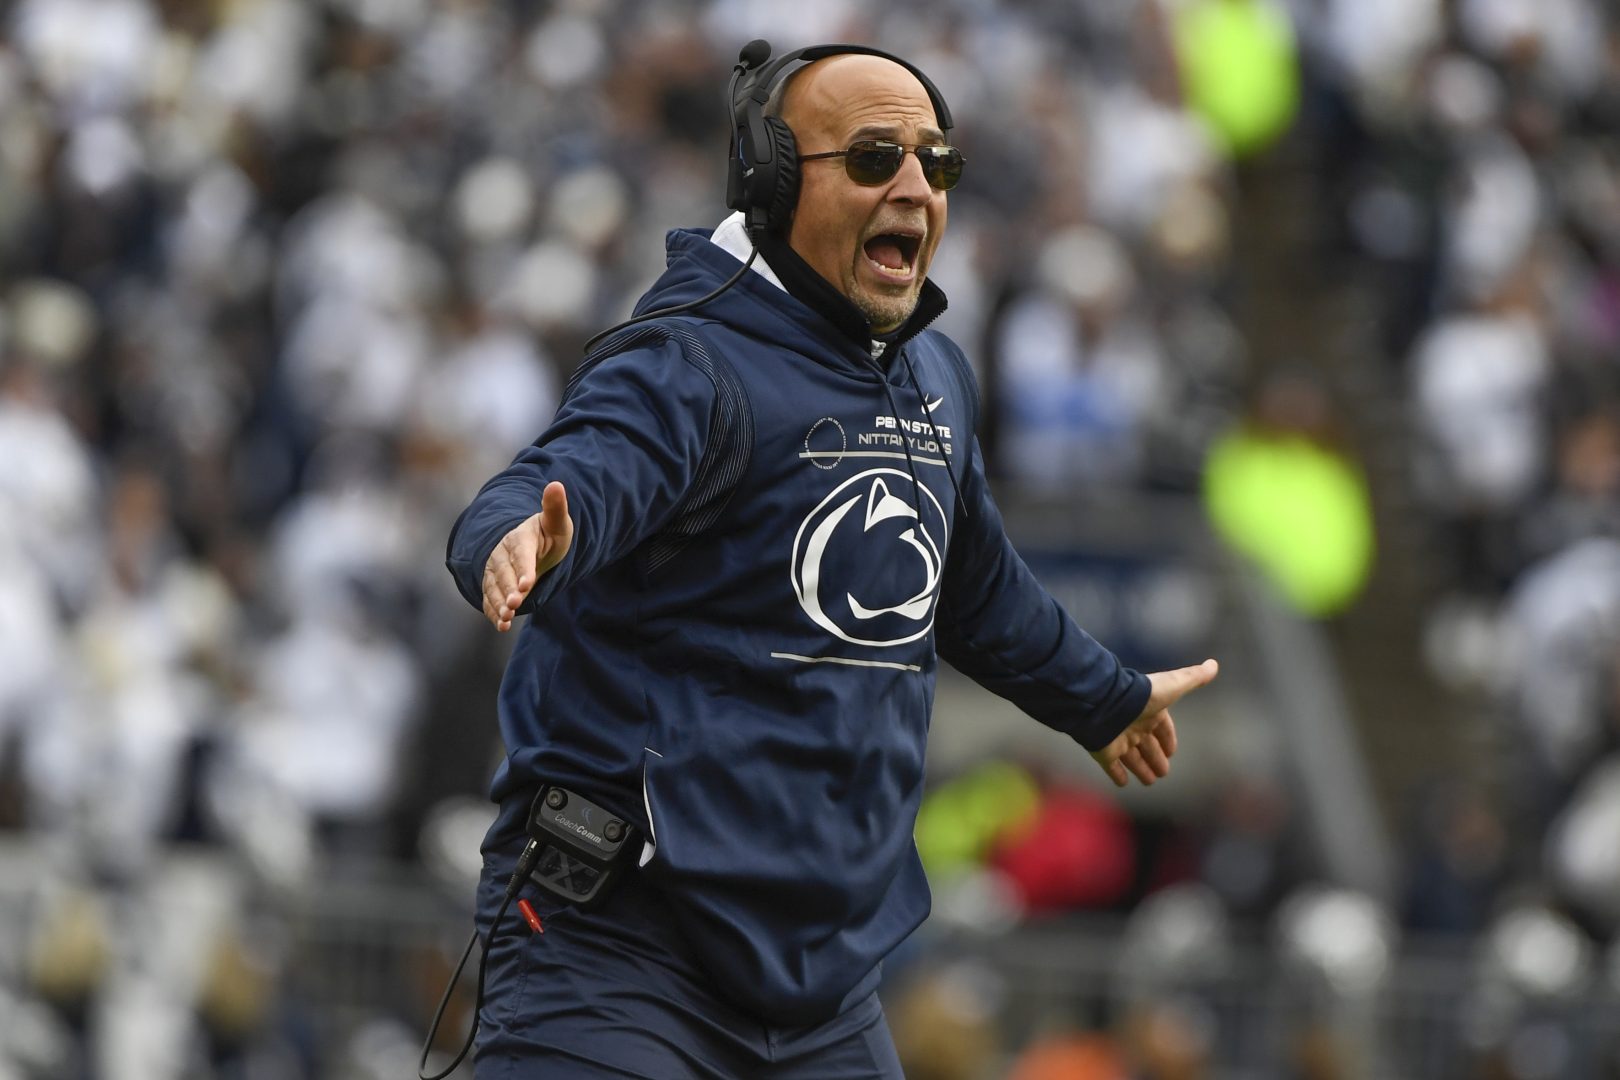 Penn State coach James Franklin reacts during the team's NCAA college football game against Rutgers in State College, Pa., Saturday, Nov. 20, 2021. Penn State won 28-0. (AP Photo/Barry Reeger)